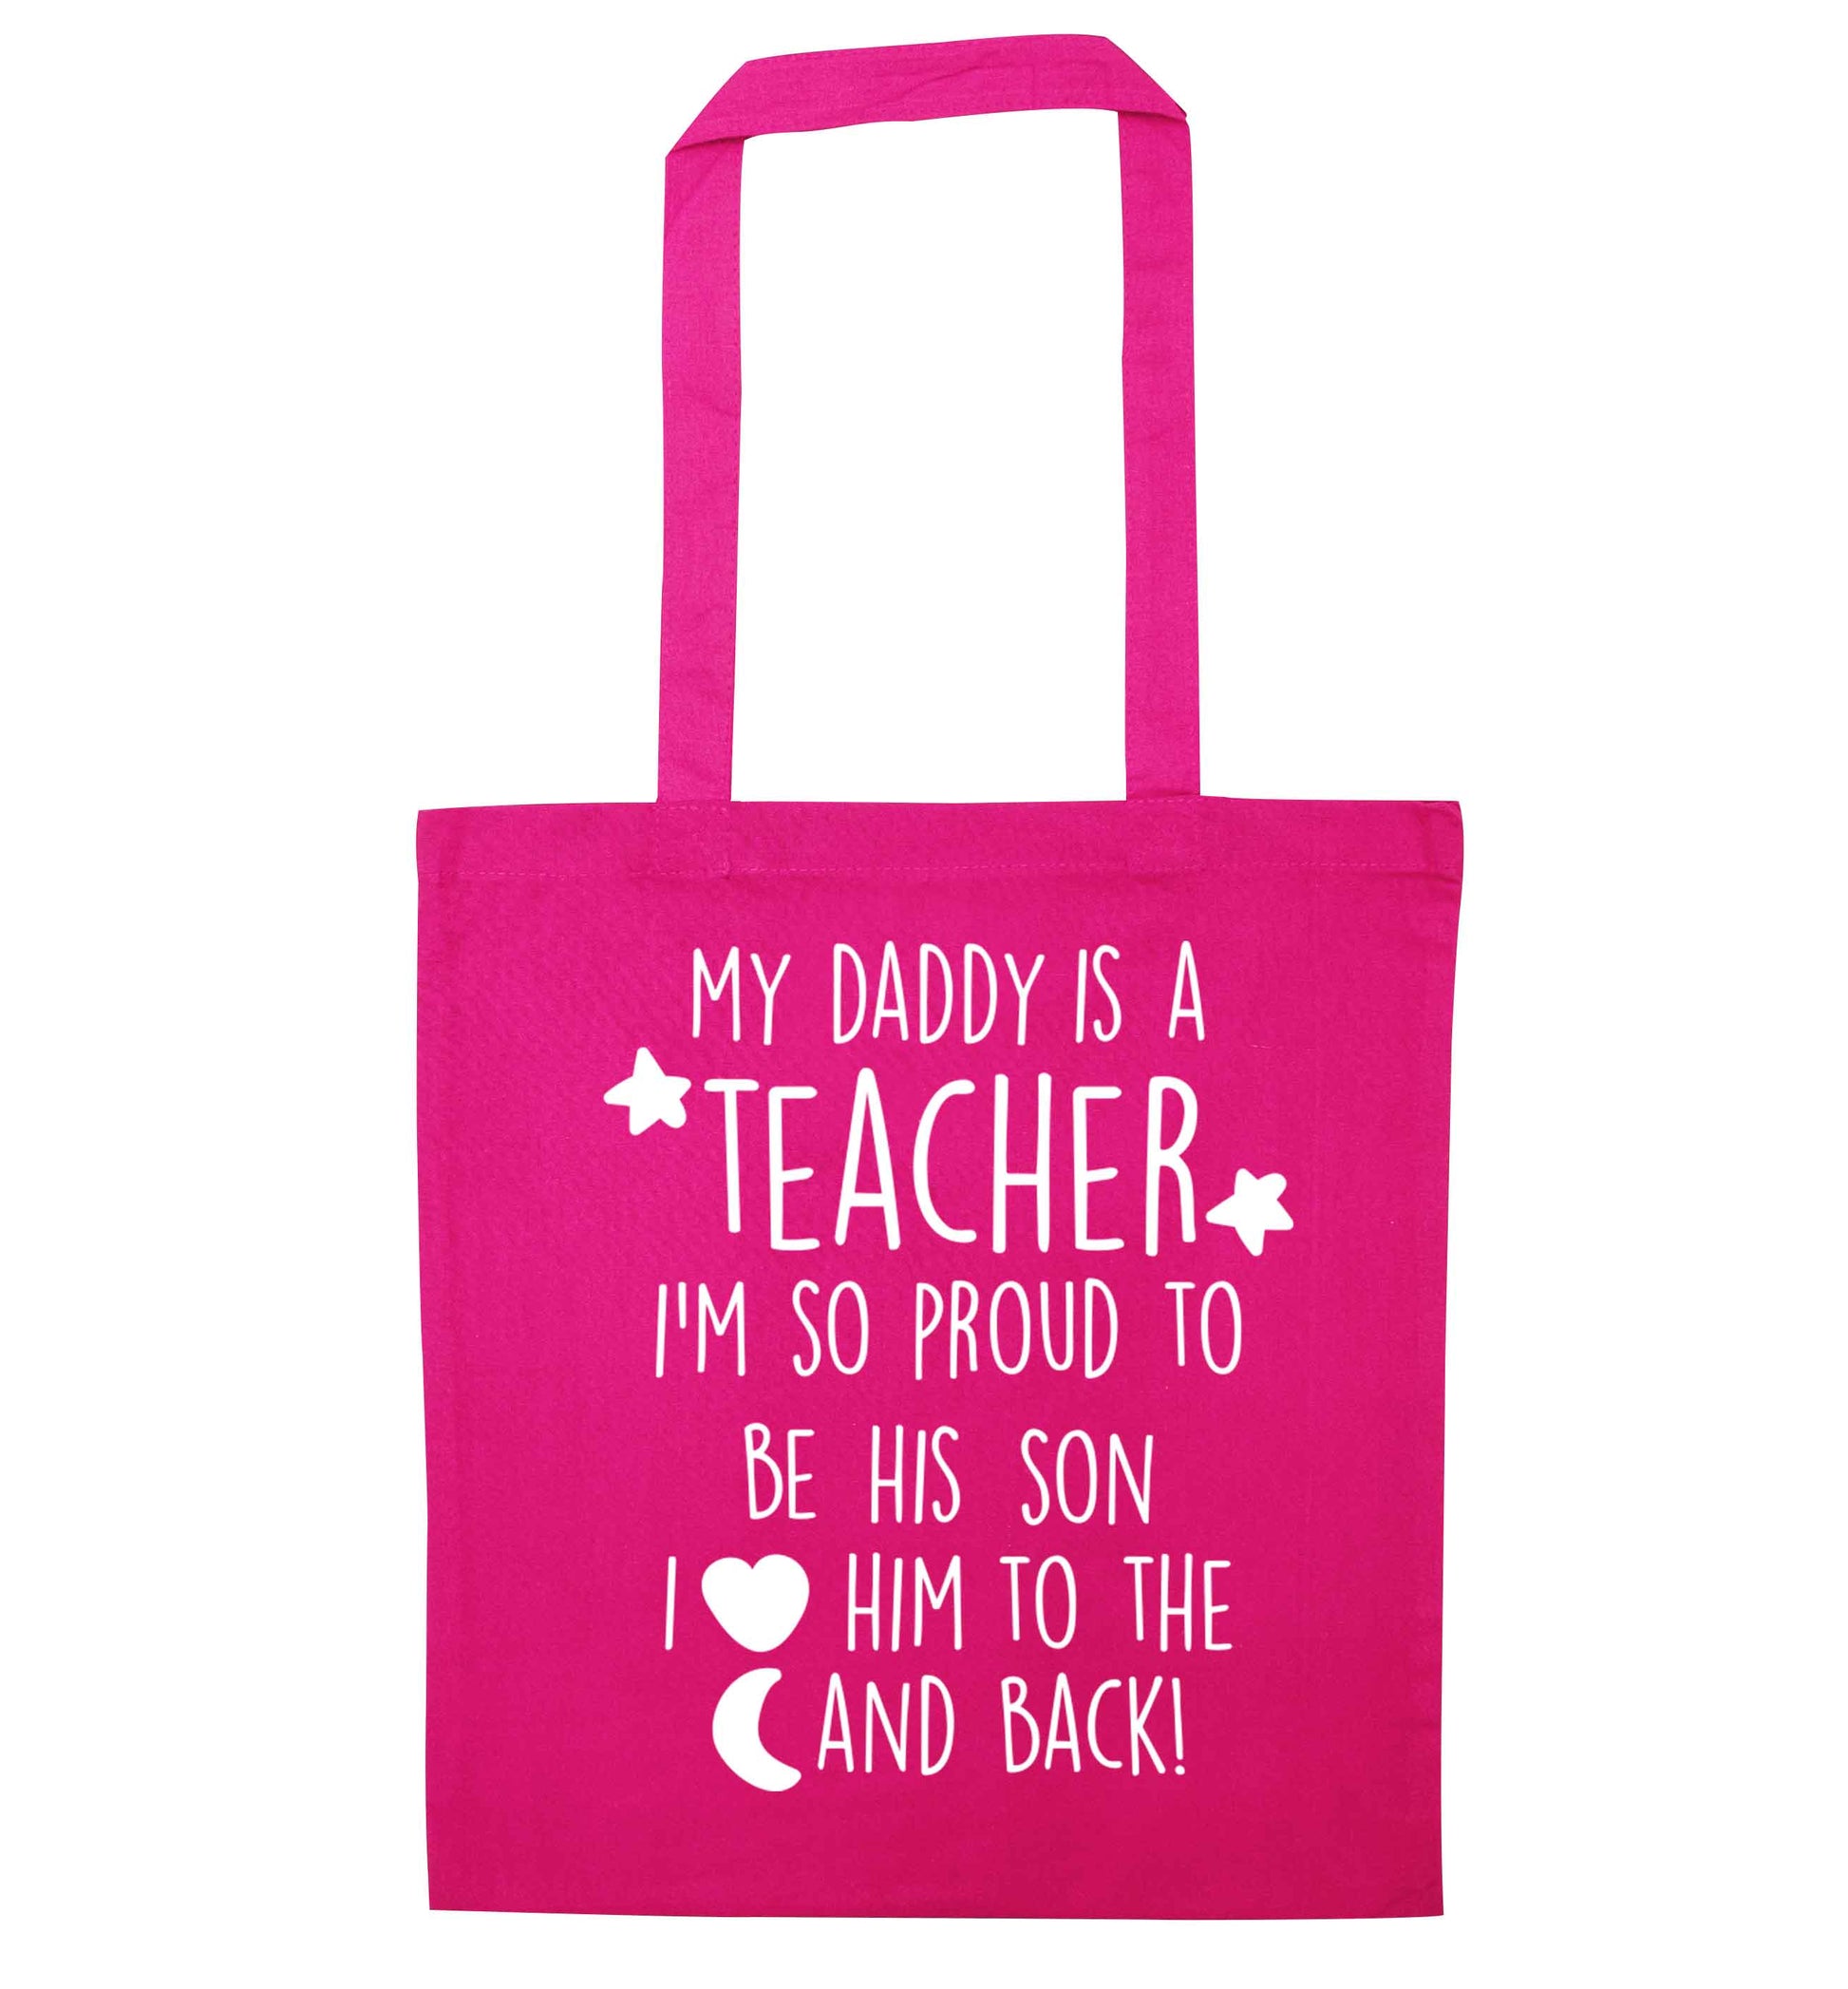 My daddy is a teacher I'm so proud to be his son I love her to the moon and back pink tote bag